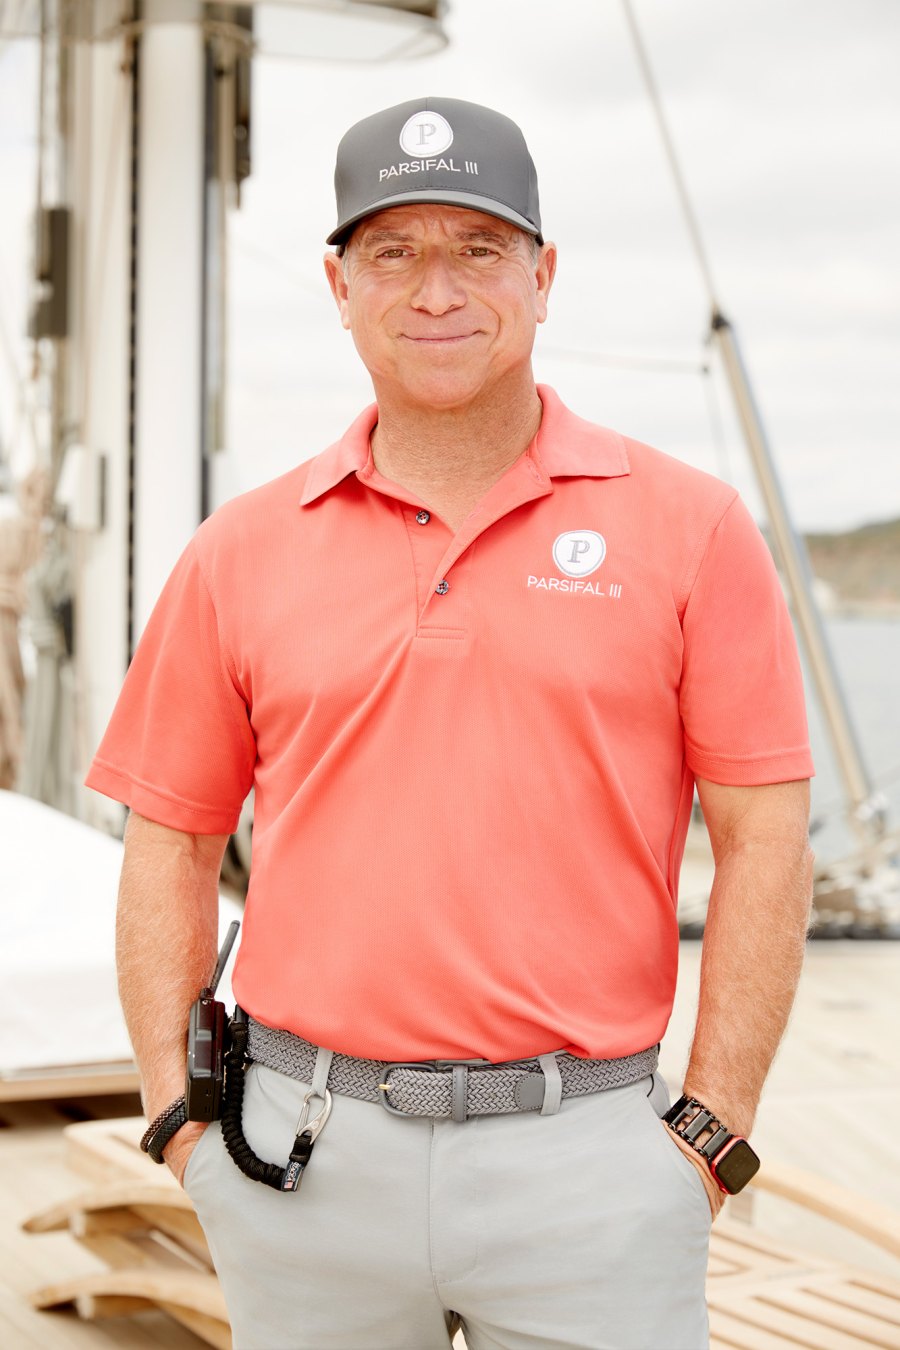 A Guide to Every Captain in the 'Below Deck' Franchise Over the Years- From Below Deck's Captain Lee to Below Deck Med's Captain Sandy 810